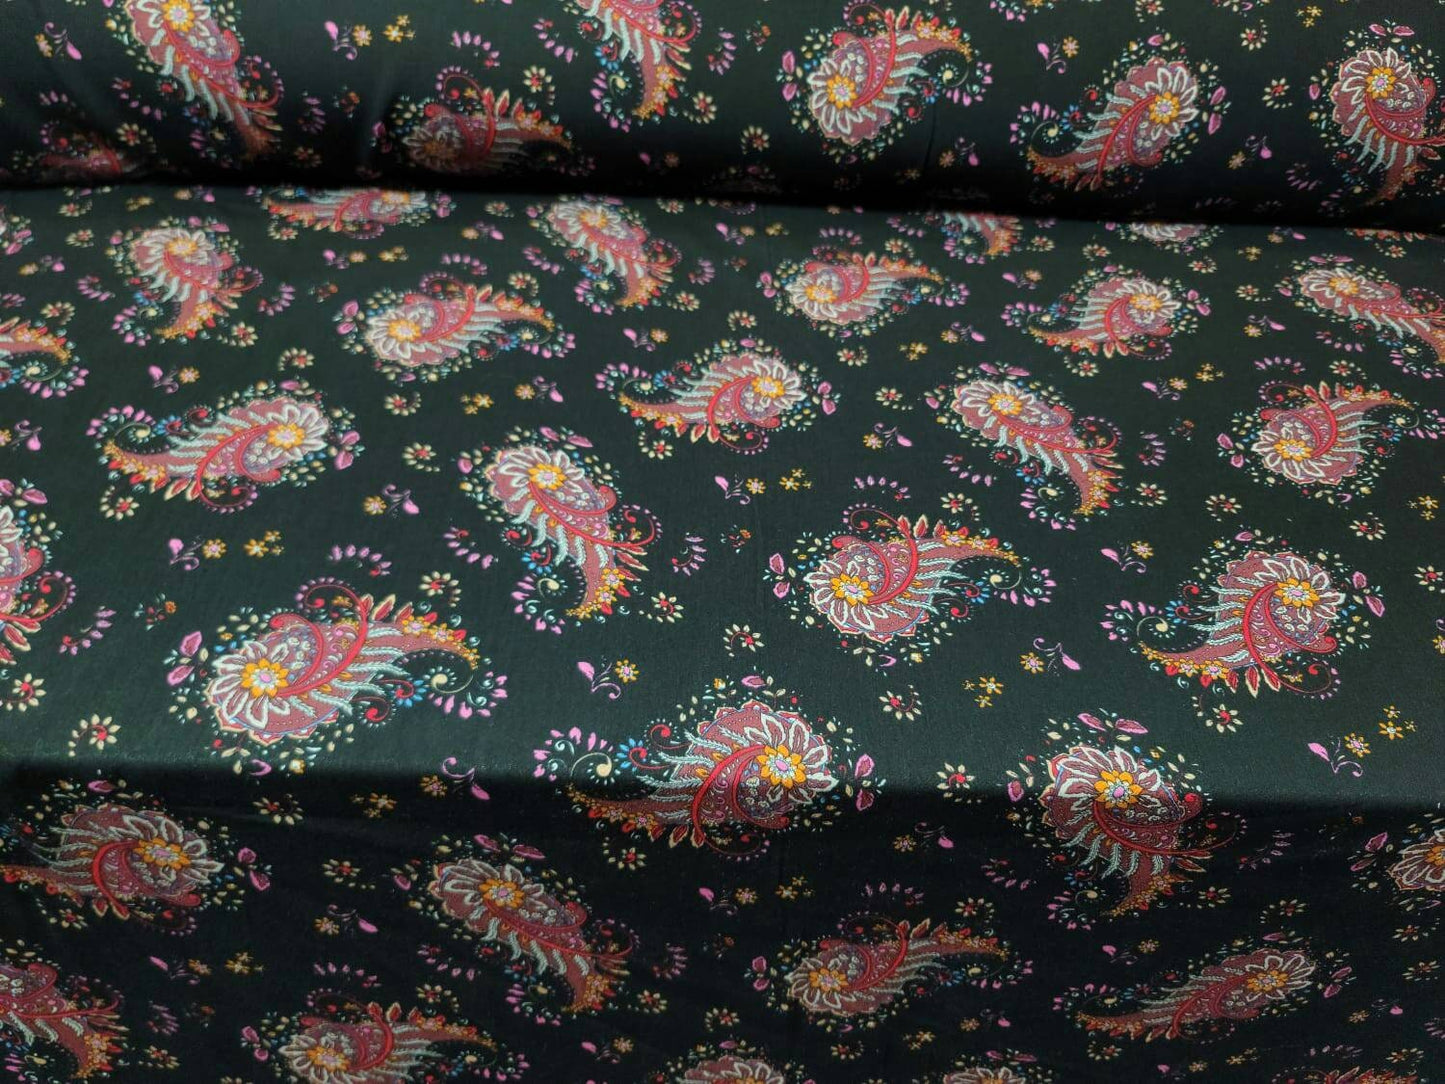 Rayon Challis Black Background Paisleys Multicolor Floral Flowers  Fabric By The Yard Pink Red Orange Dress Clothing